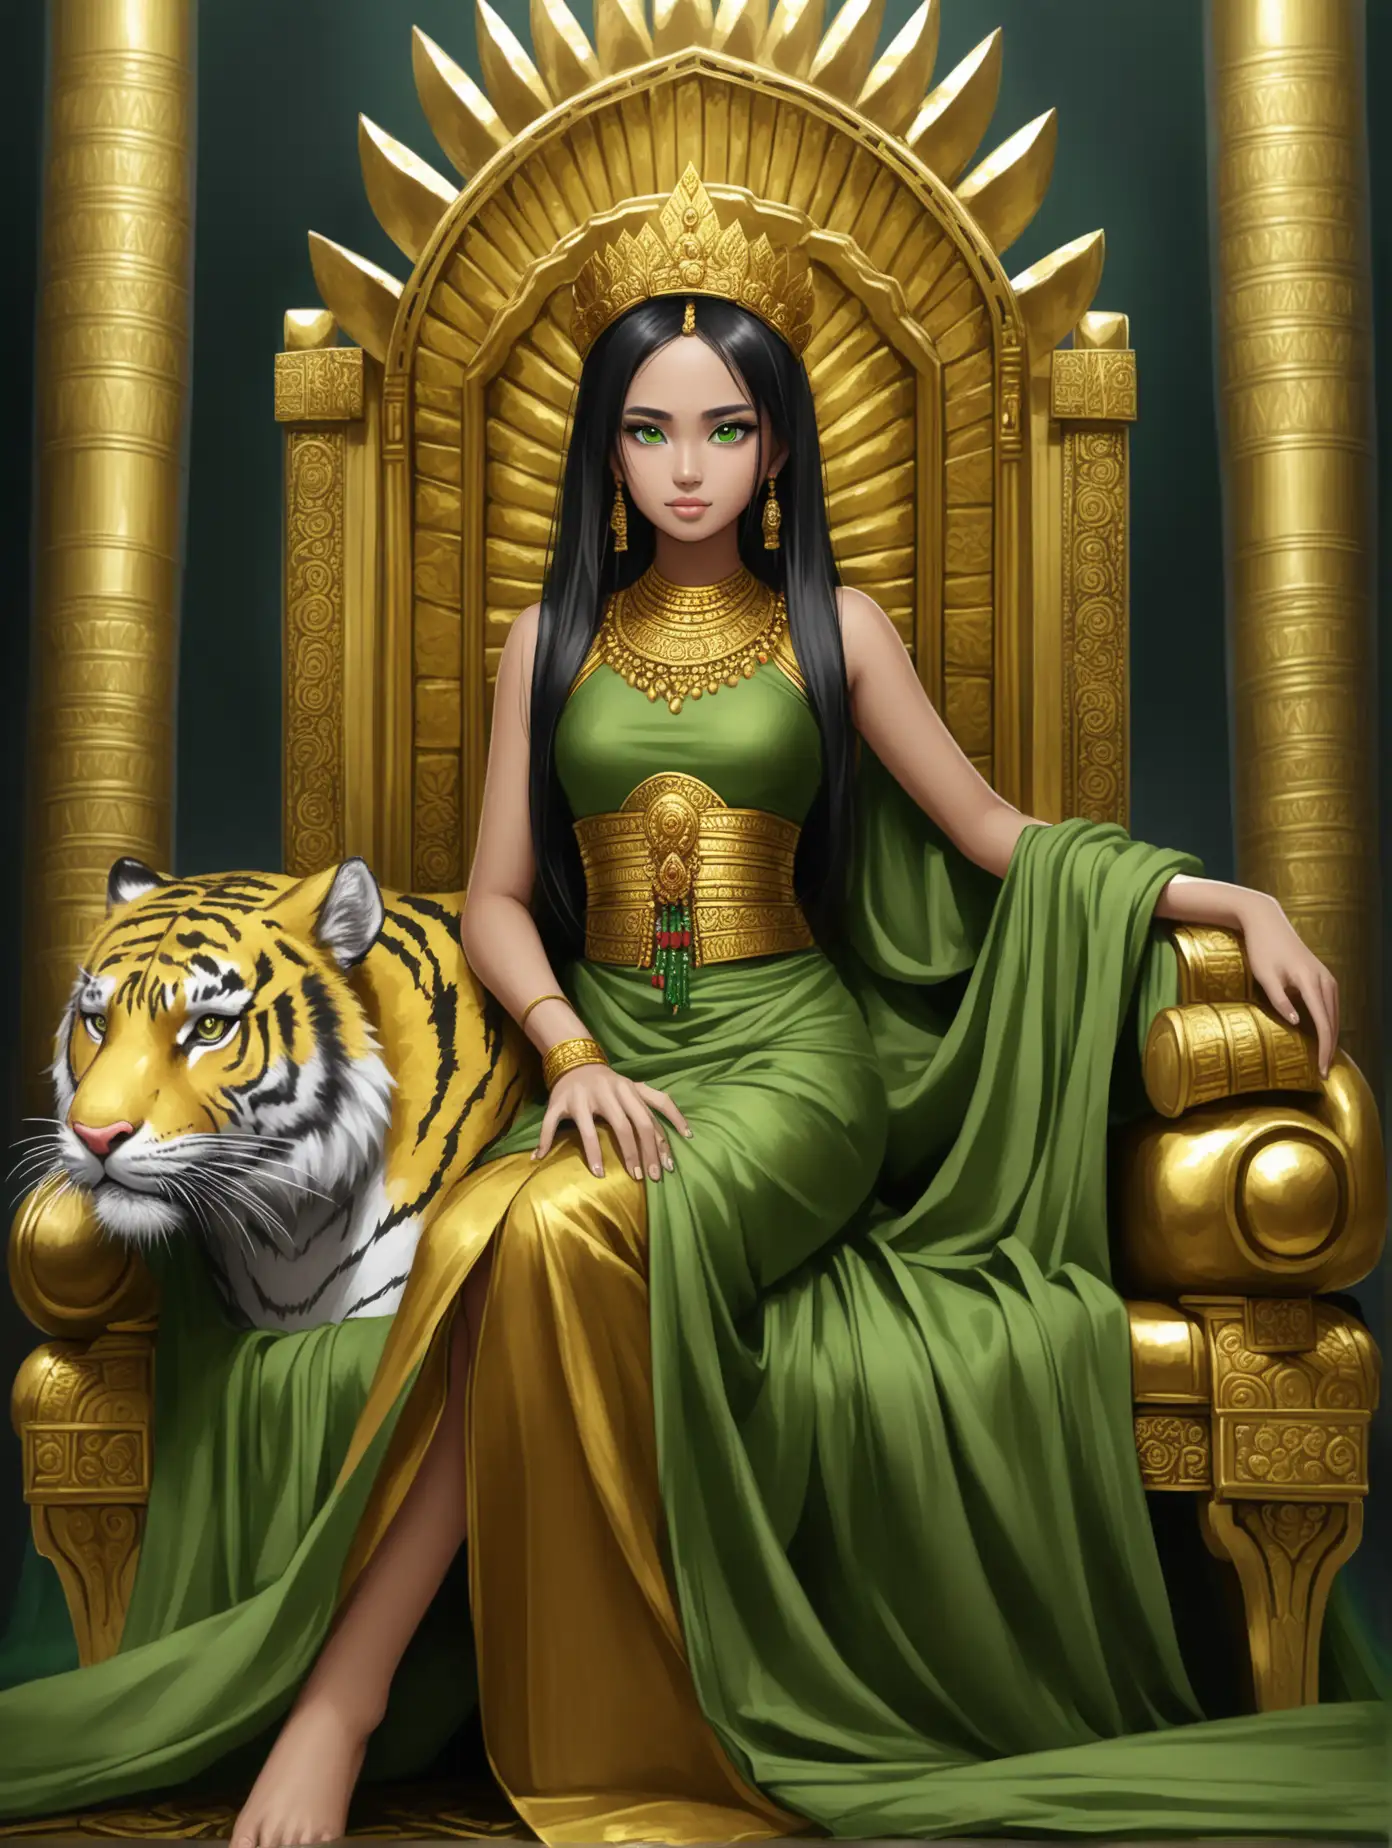 a very beautiful 25 year old woman sitting on a golden throne wearing green cloth, ancient Indonesian clothes, with gold jewelry, and a tiger by her side